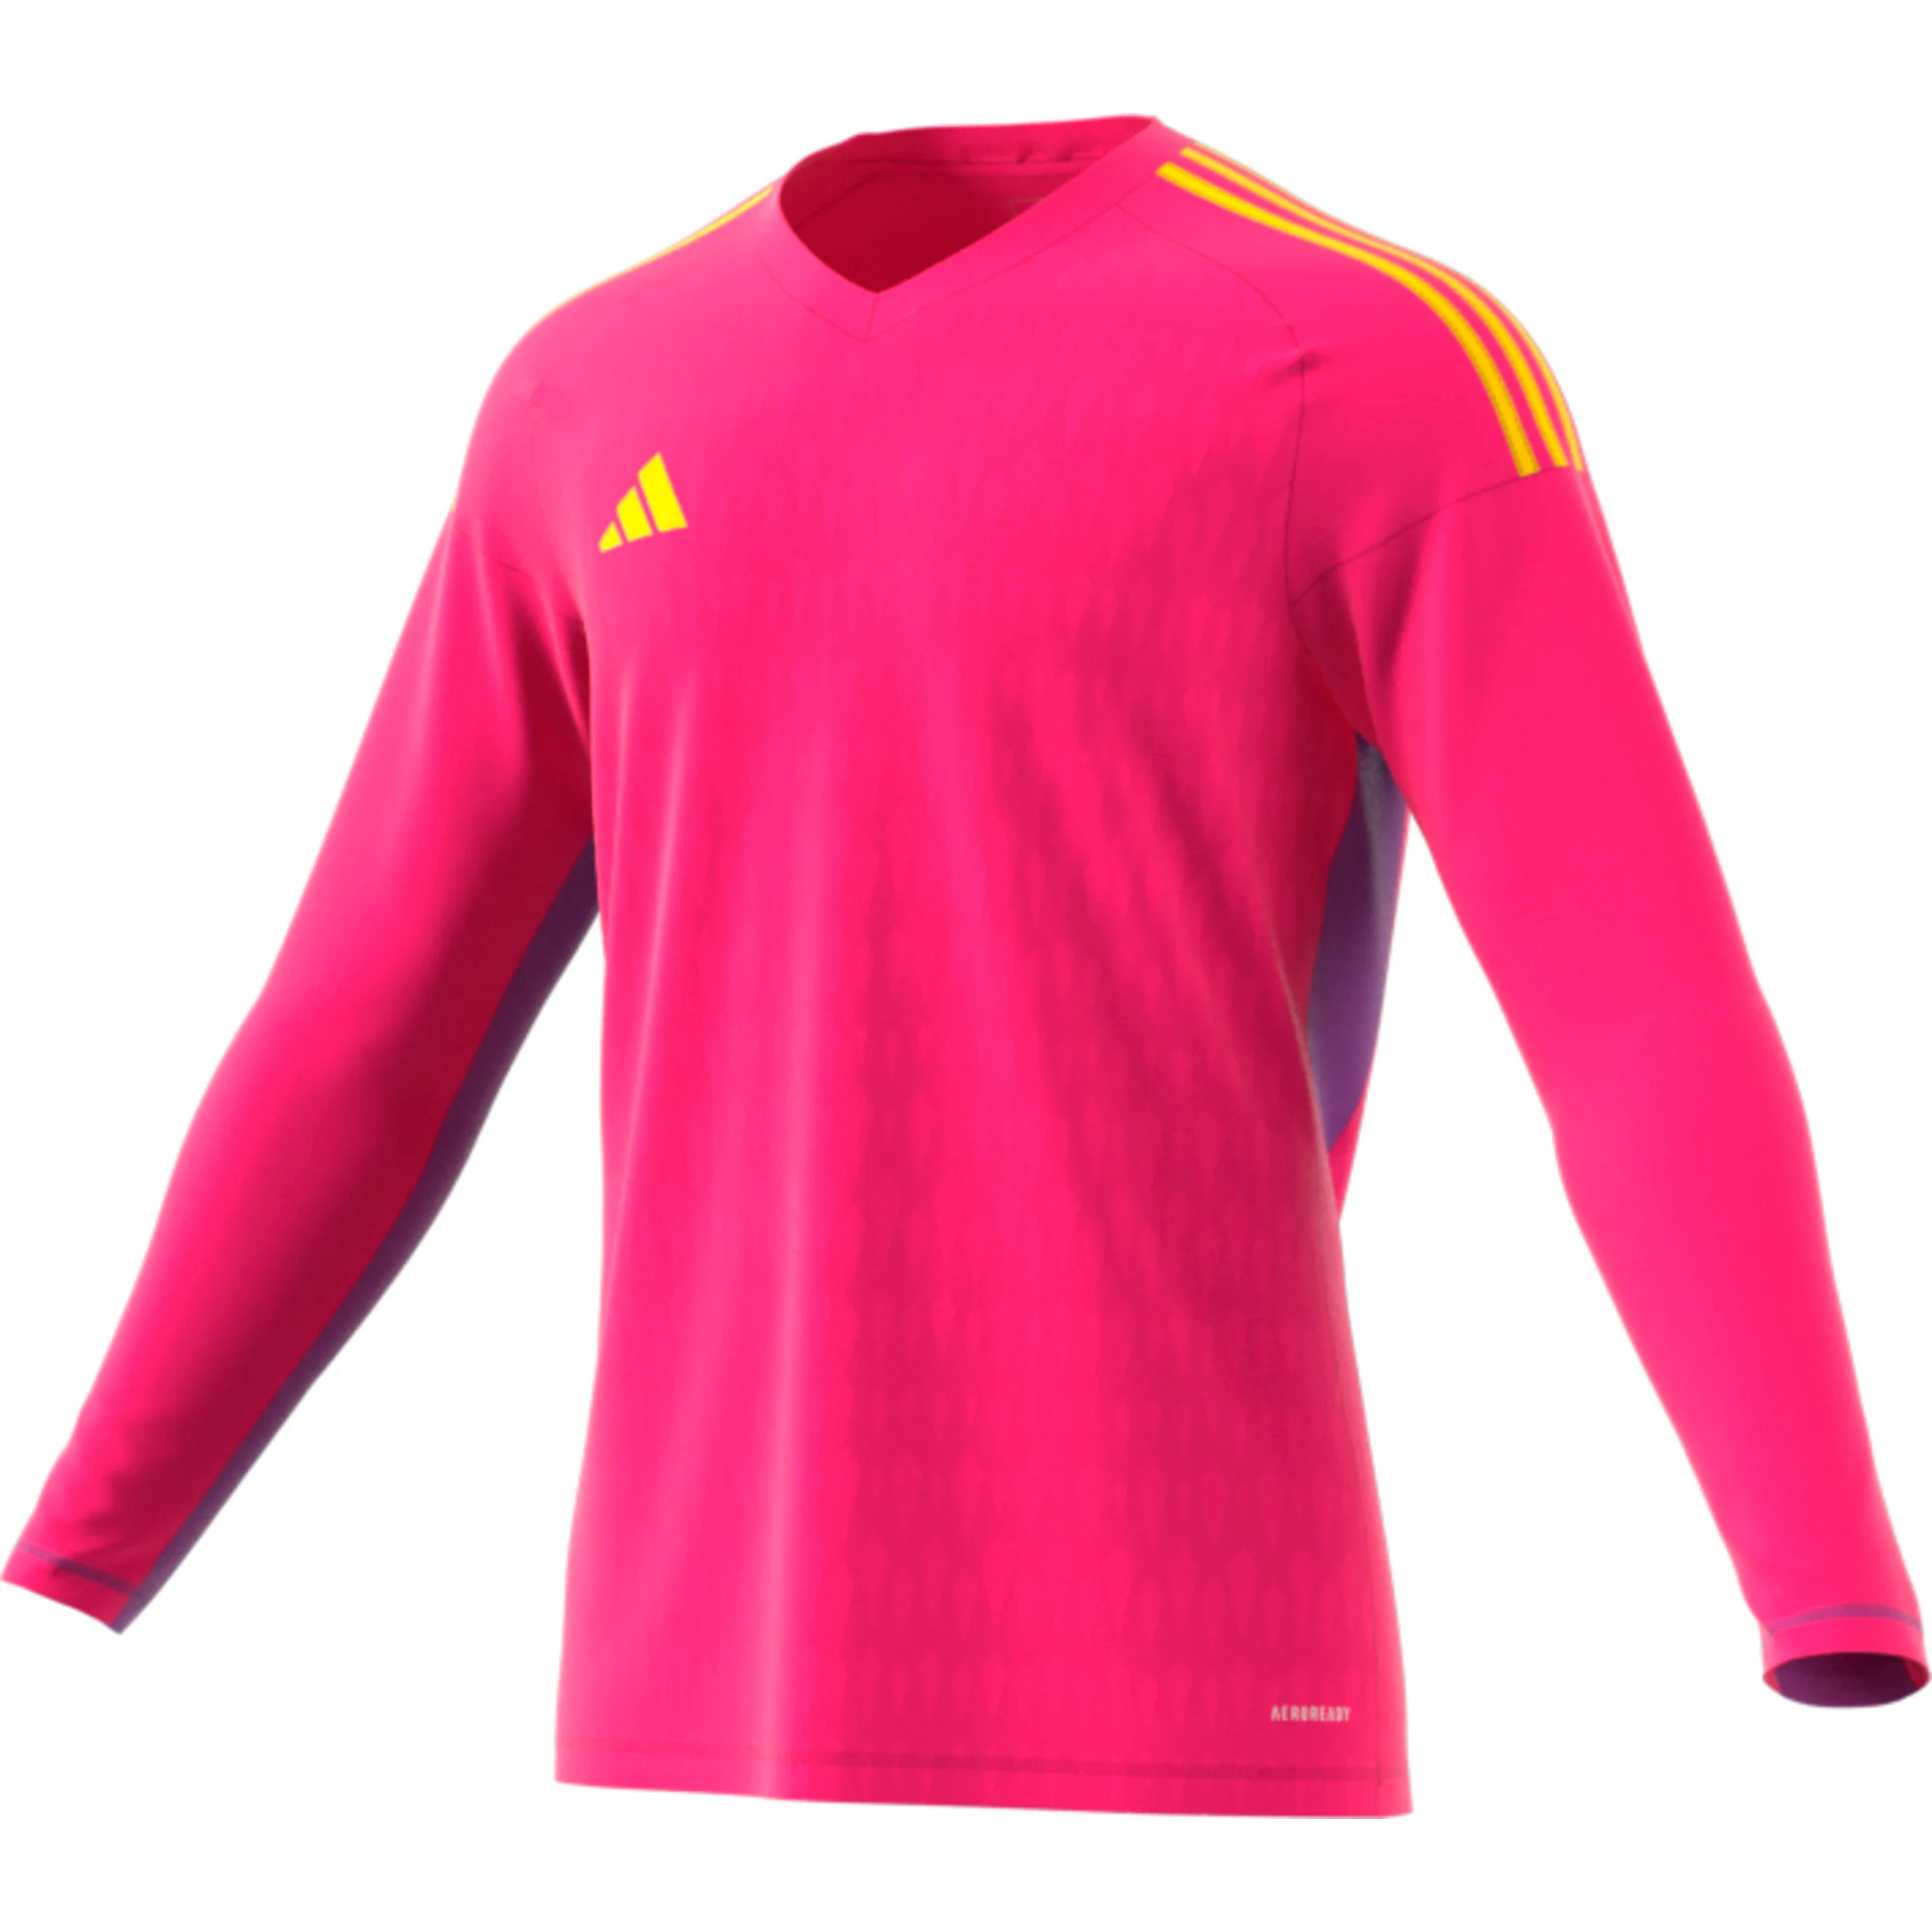 ADIDAS T23 COMPETITION GK JERSEY LS TEREMA